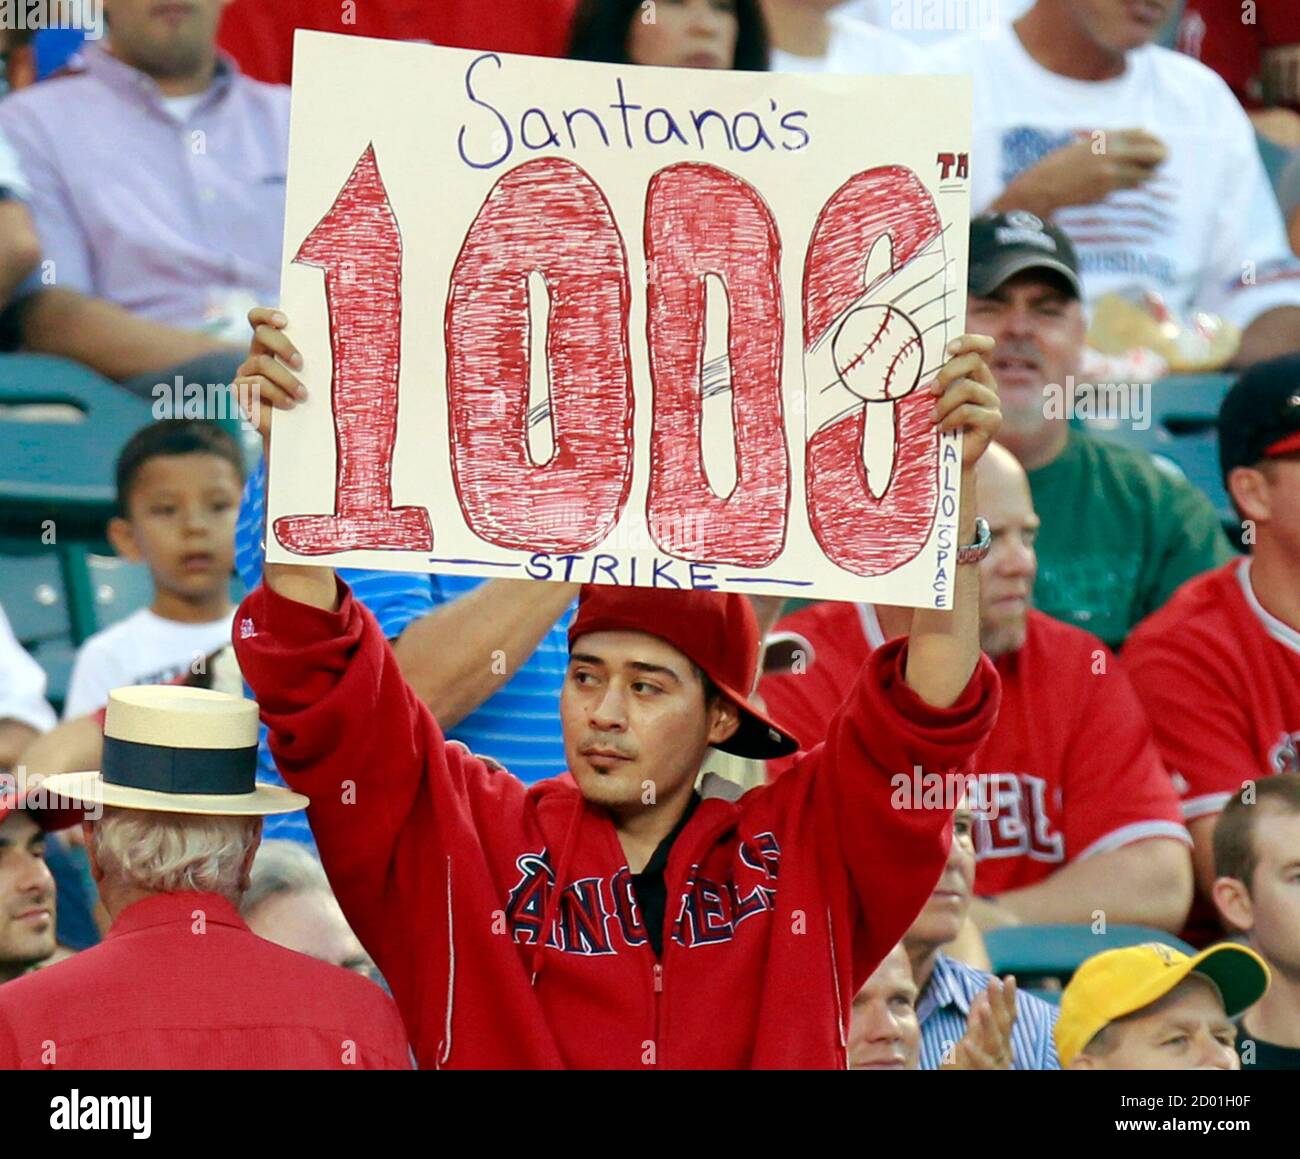 A fan celebrates Los Angeles Angels' Ervin Santana's 1000th career strikeout during their MLB American League baseball game against the Texas Rangers in Anaheim, California August 17, 2011. REUTERS/Lucy Nicholson (UNITED STATES - Tags: SPORT BASEBALL) Stock Photo